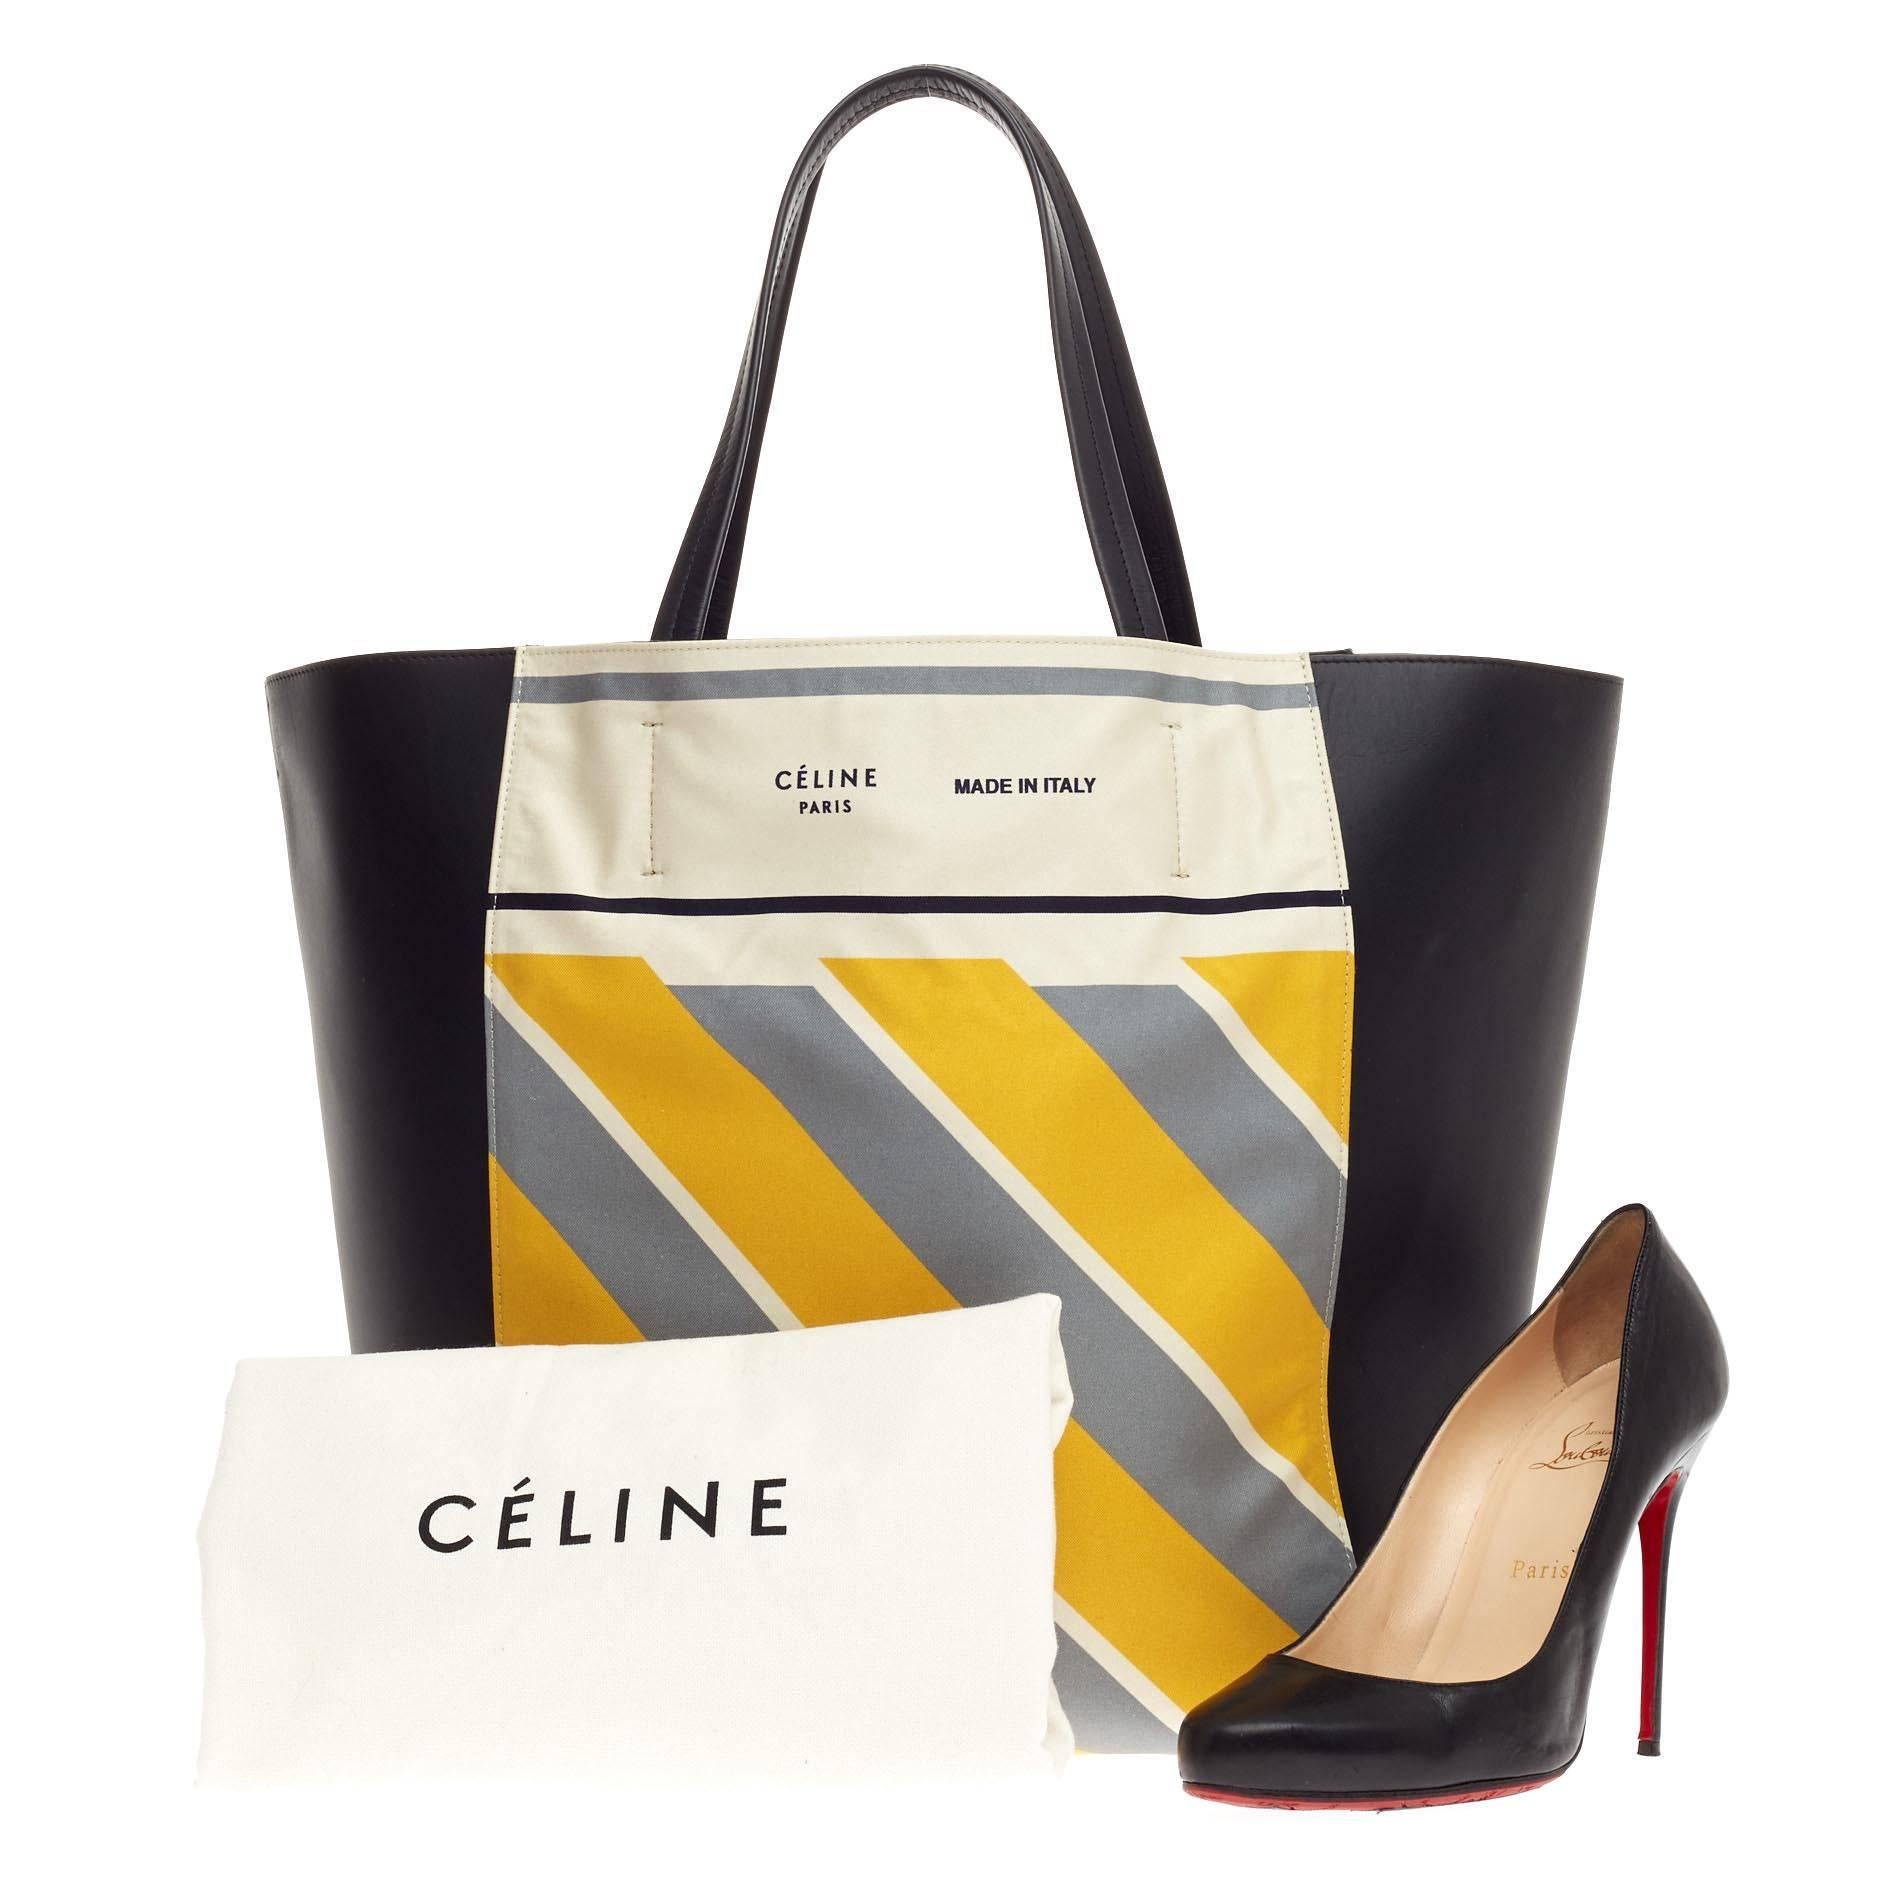 This authentic Celine Foulard Phantom Cabas Tote Leather presented in the brand's Fall 2013 Collection is the perfect everyday shopper bag holding all essentials. Crafted from white foulard fabric with diagonal yellow and gray stripes and black